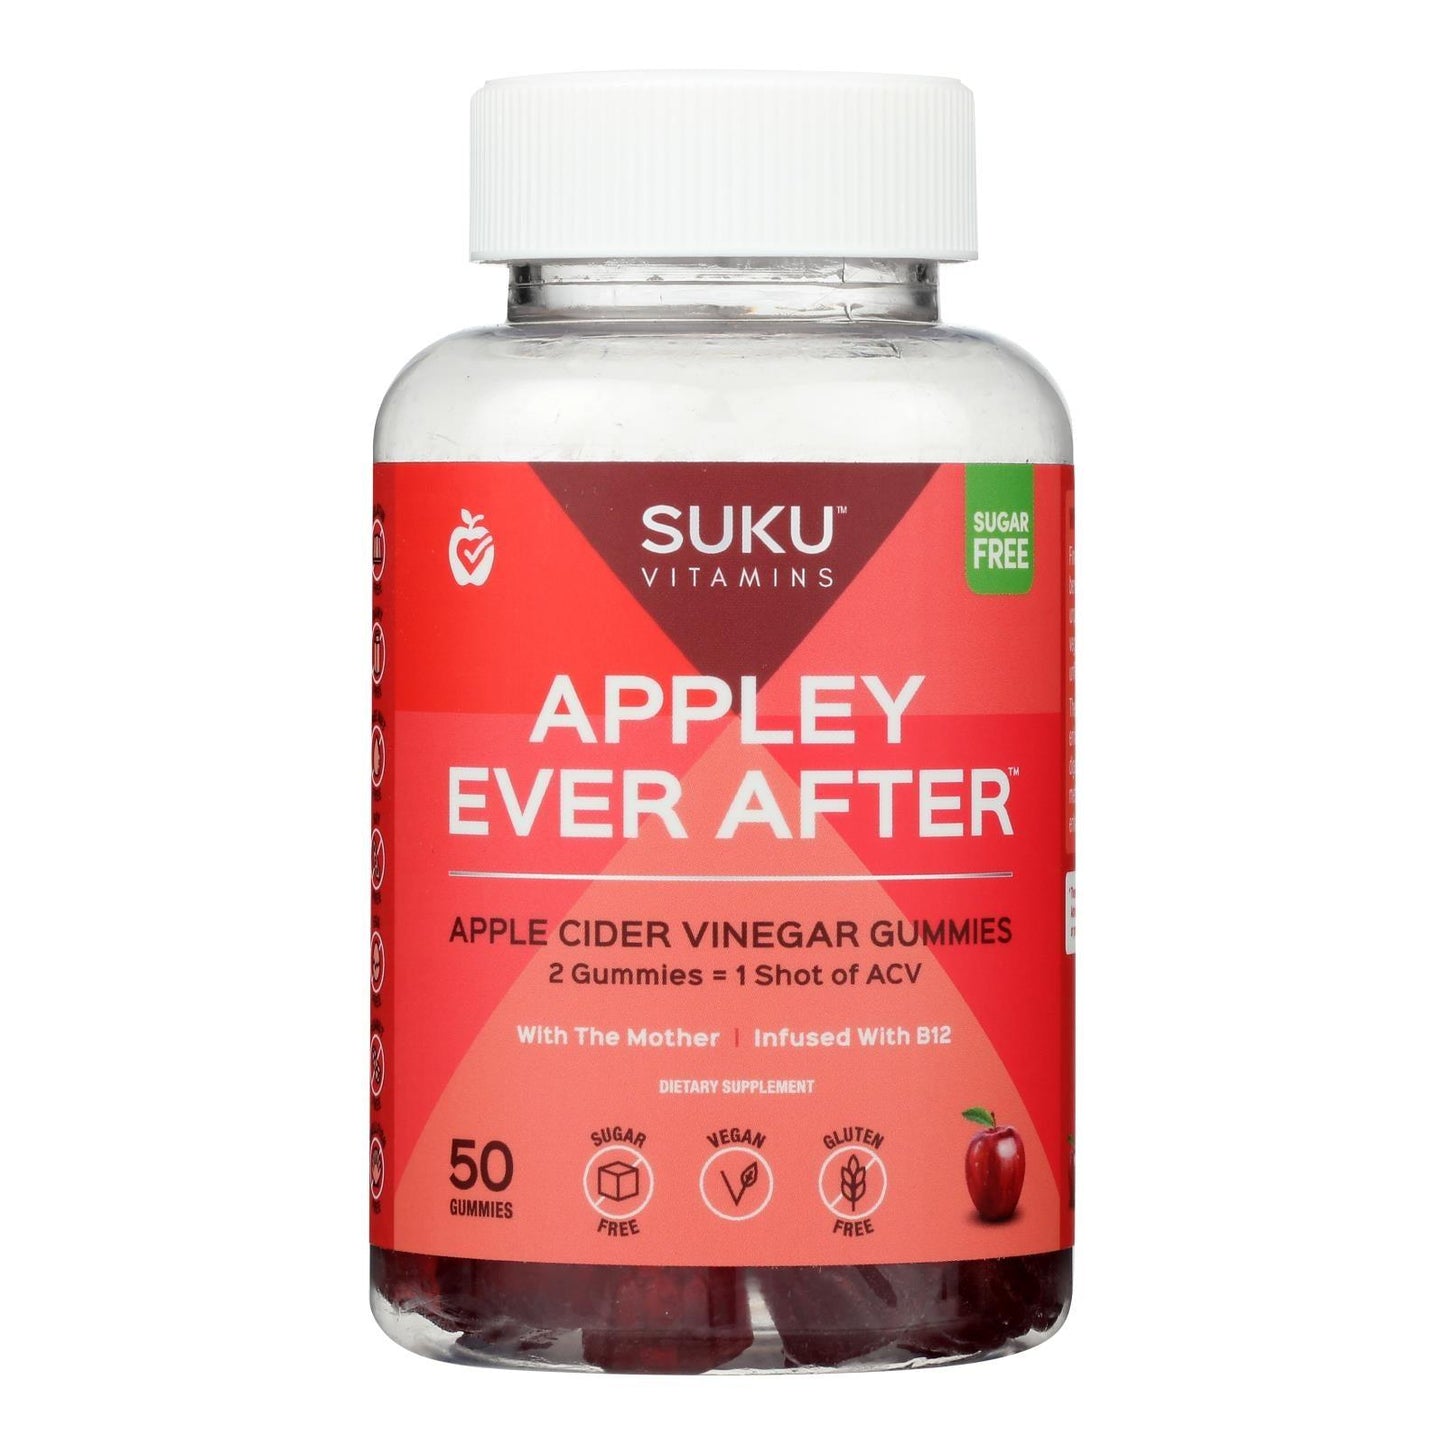 Suku Vitamins - Gummy Appley Ever After - 1 Each -50 Count - Loomini